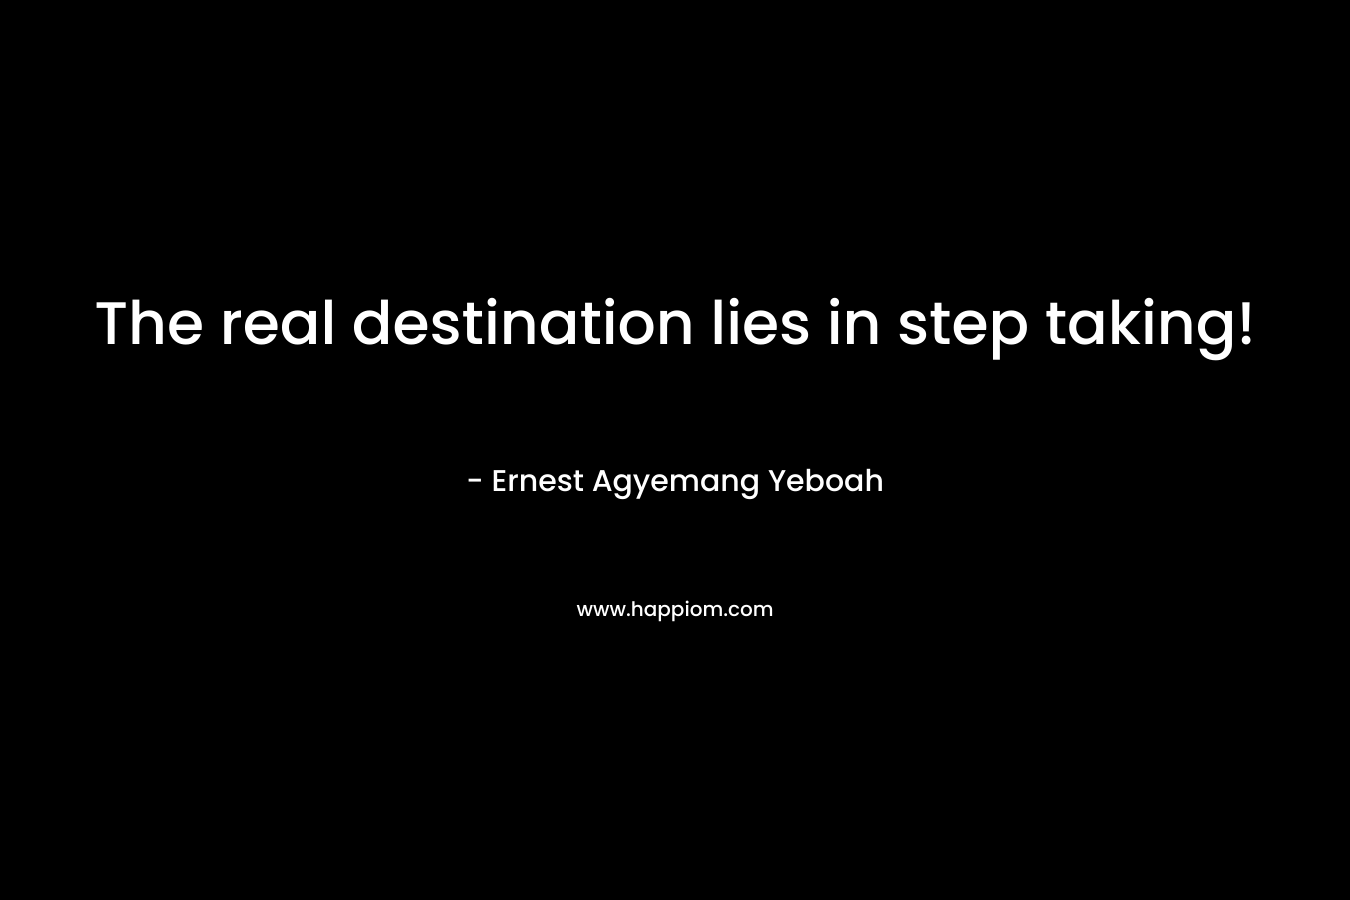 The real destination lies in step taking!